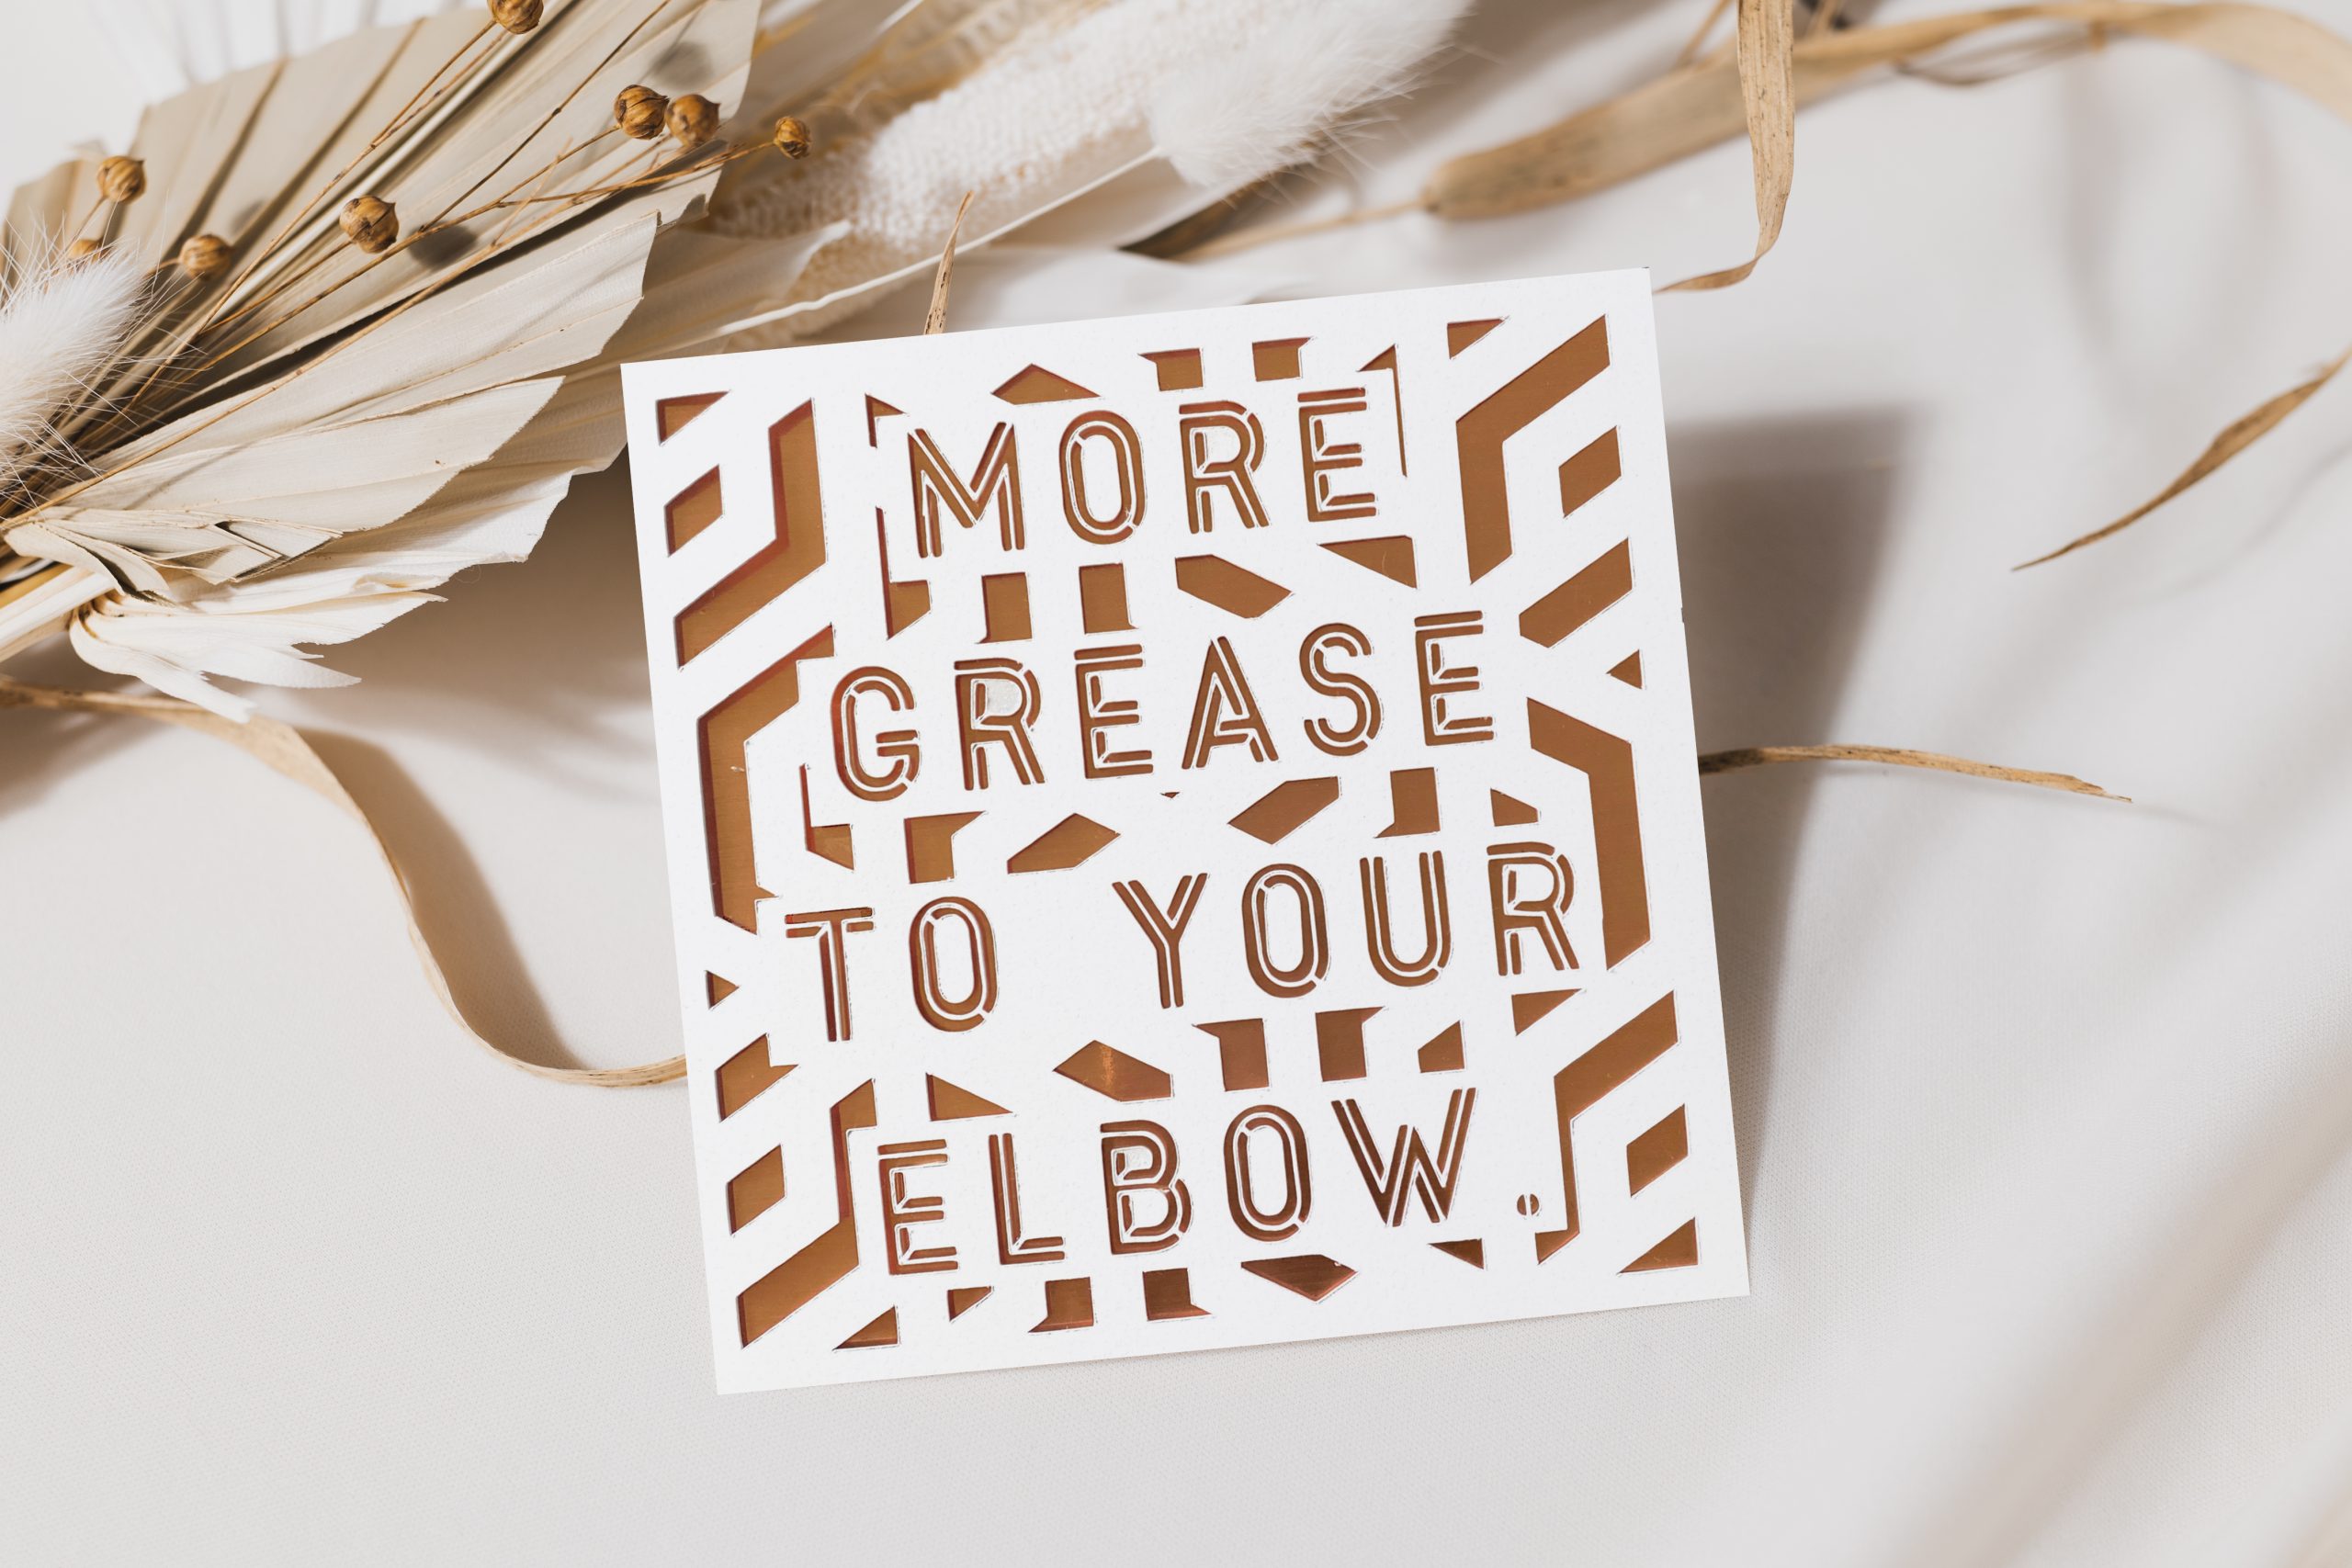 Papercut Congratulations Card, More Grease to Your Elbow (Well Done)